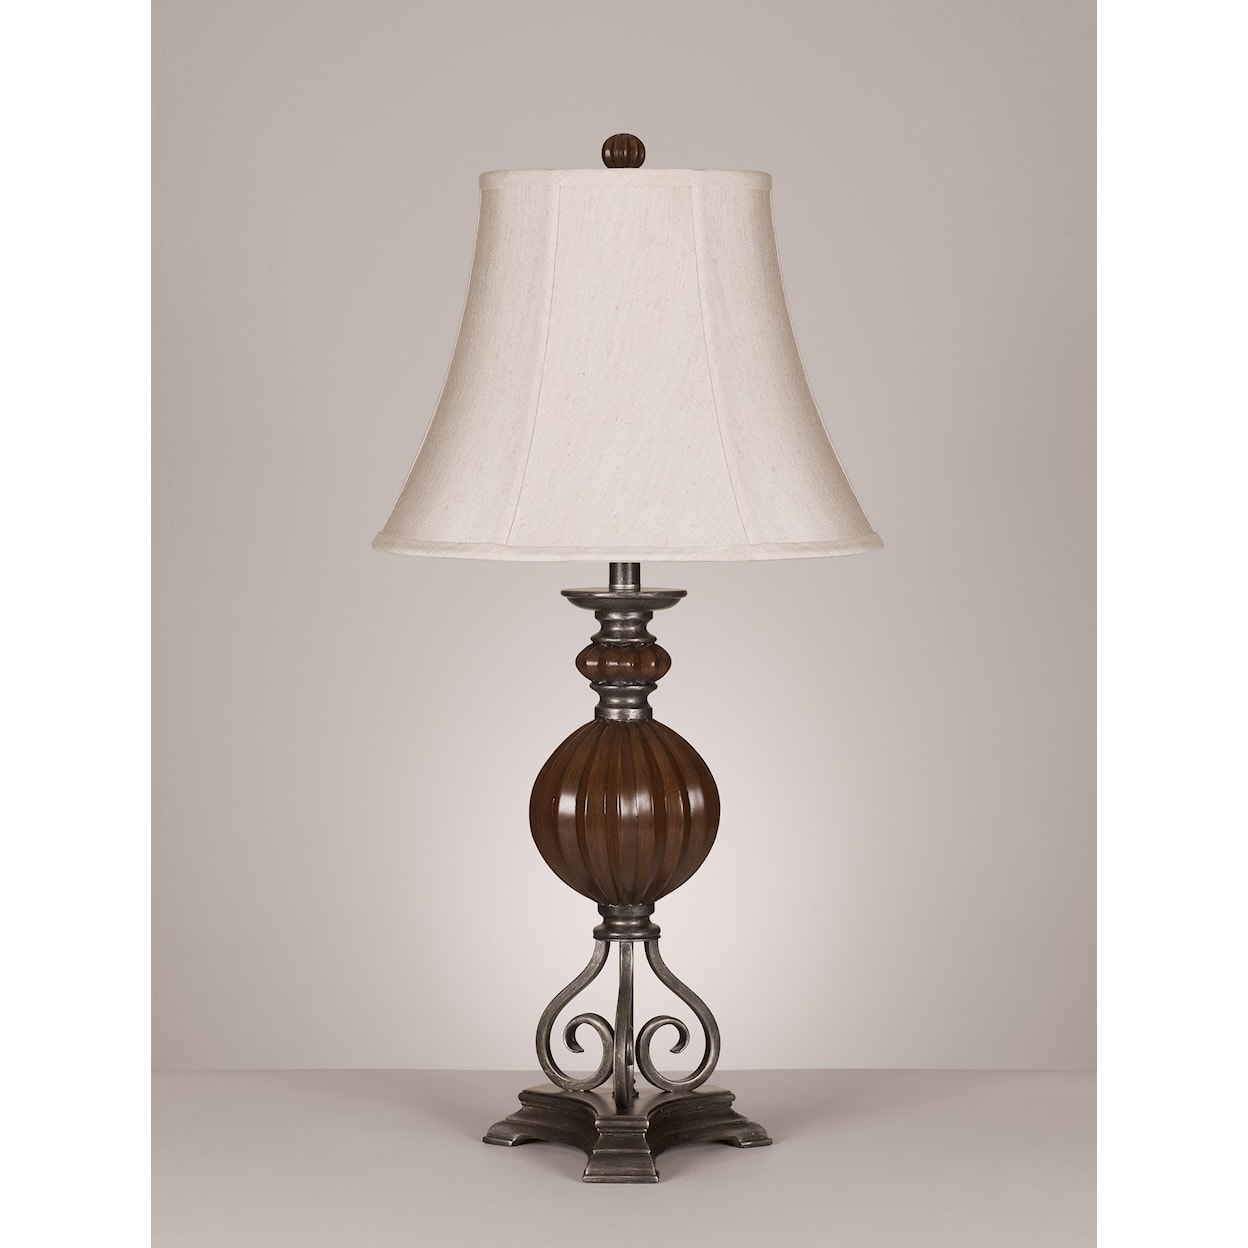 Signature Design by Ashley Lamps - Old World Set of 2 Olsa Poly Table Lamps